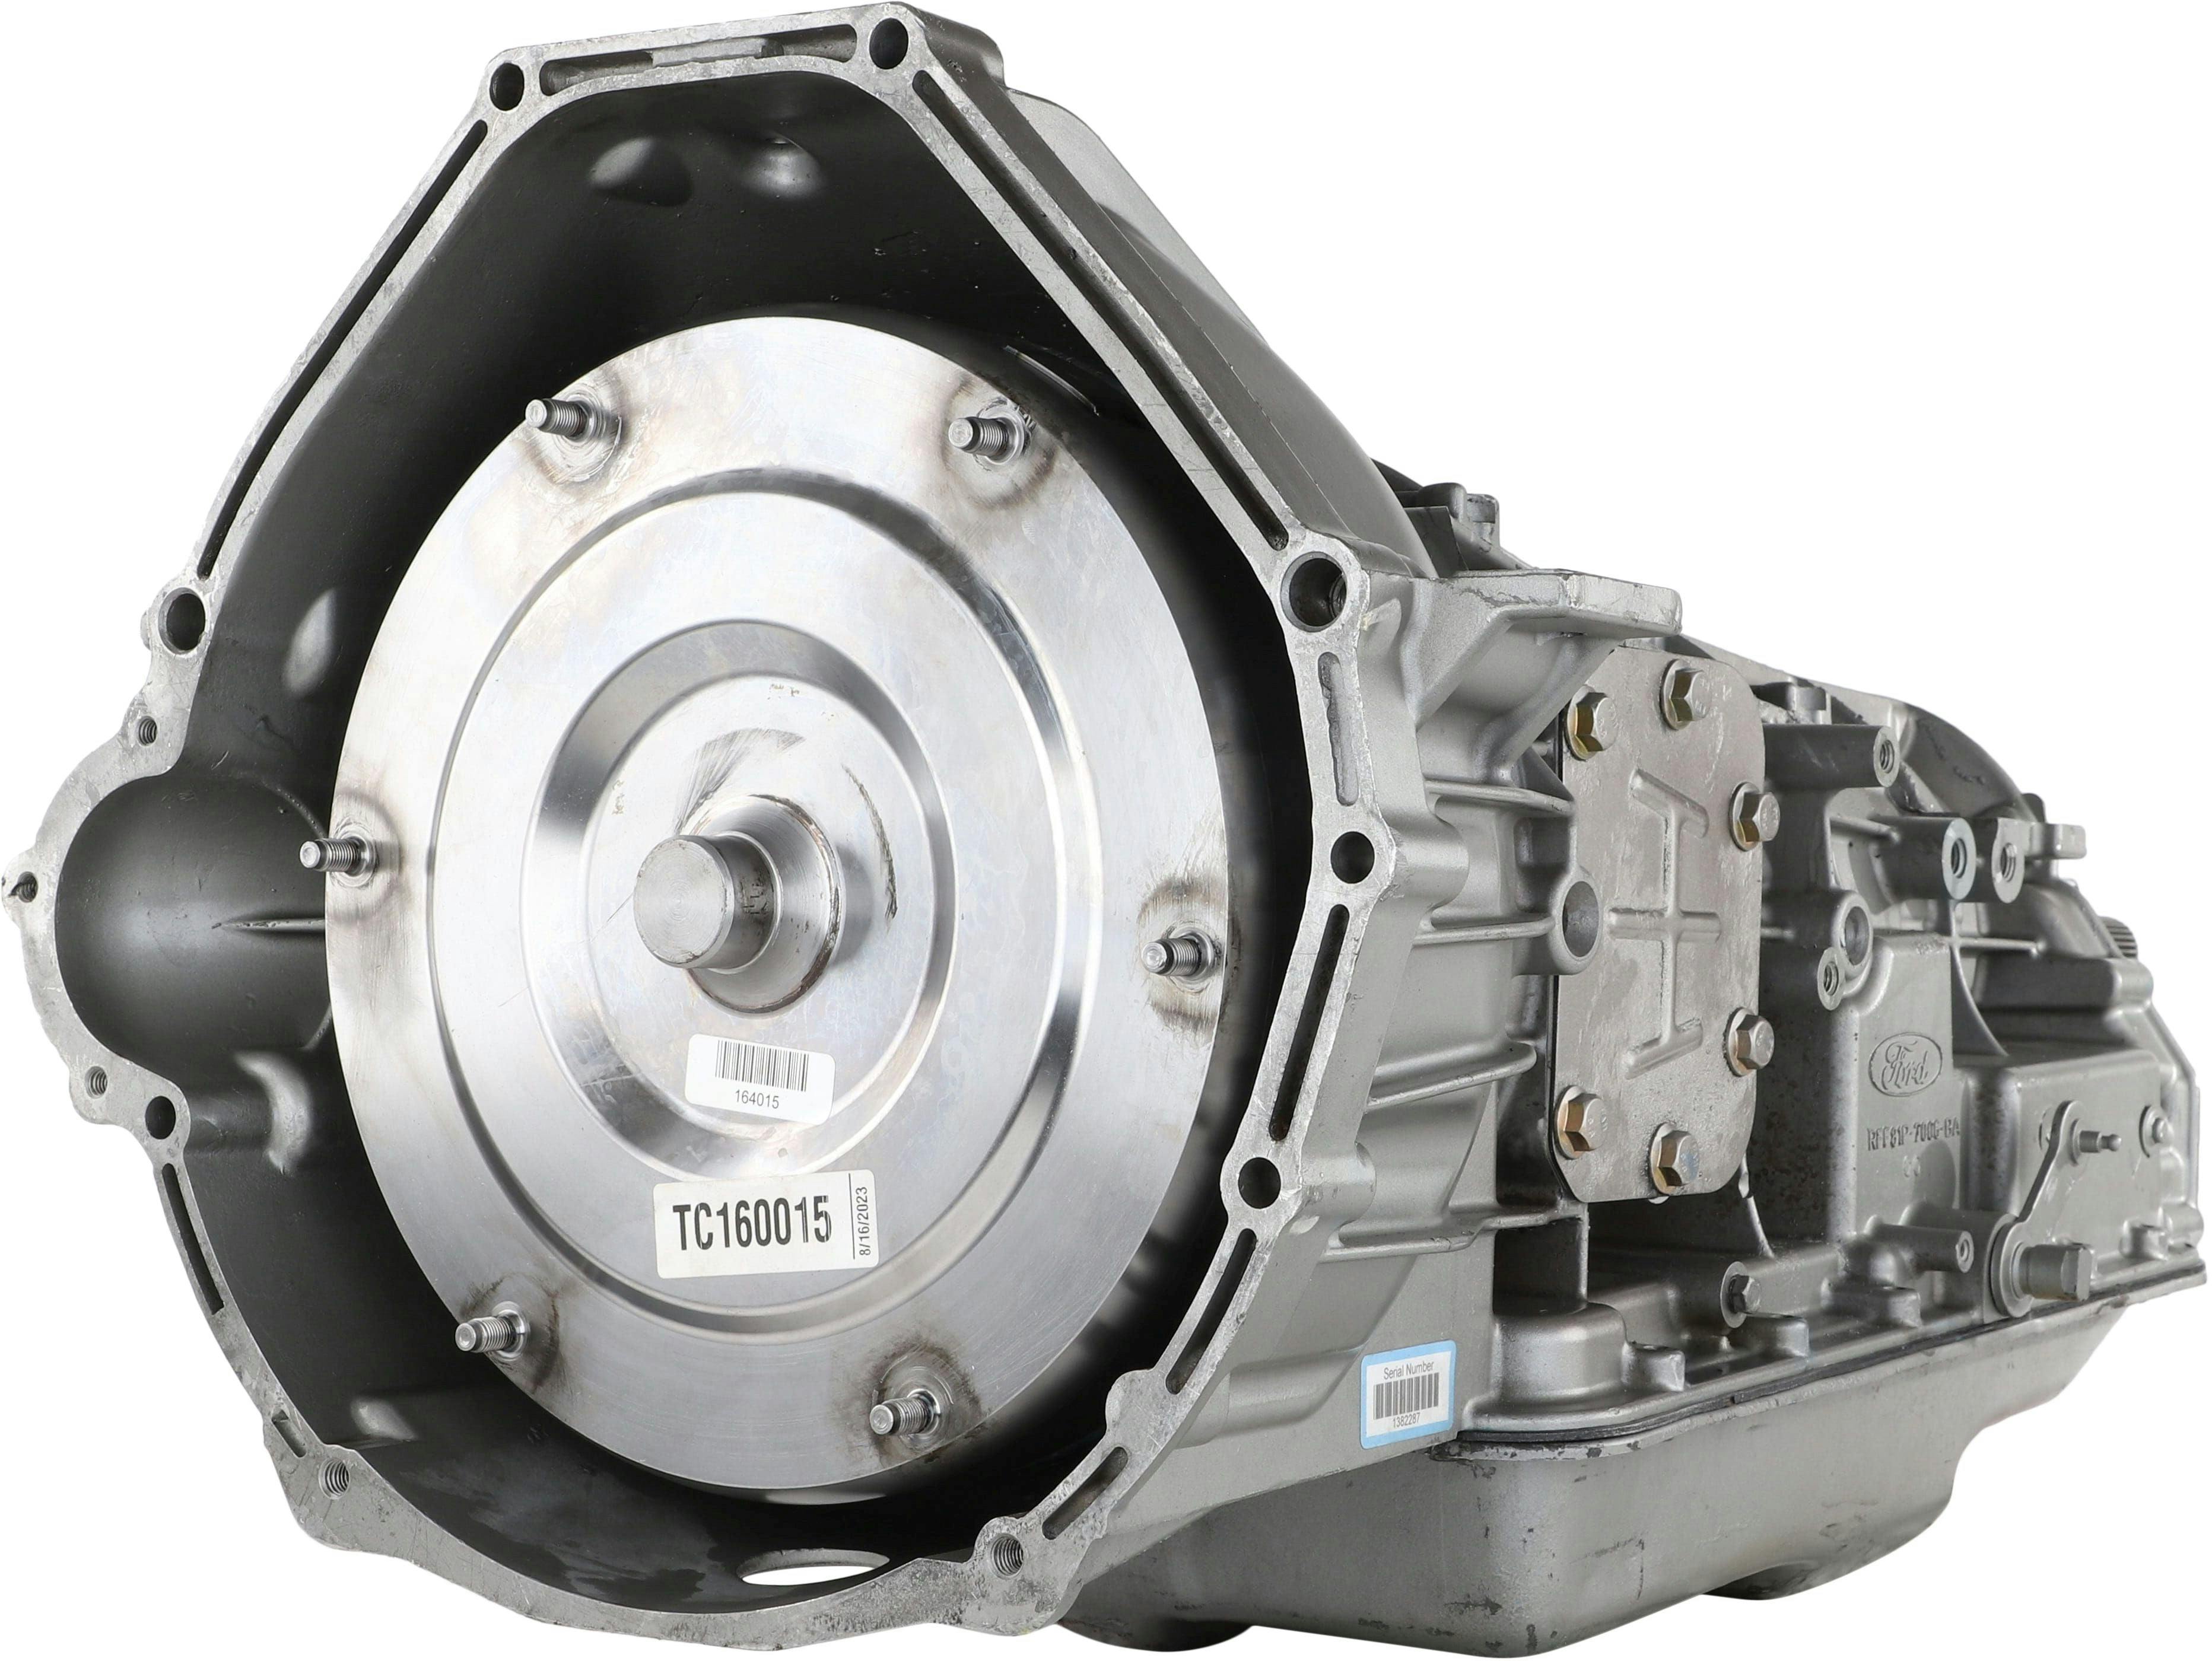 Automatic Transmission for 2000-2004 Ford F-250/350/450/550 Super Duty RWD with 6.8L V10 Engine